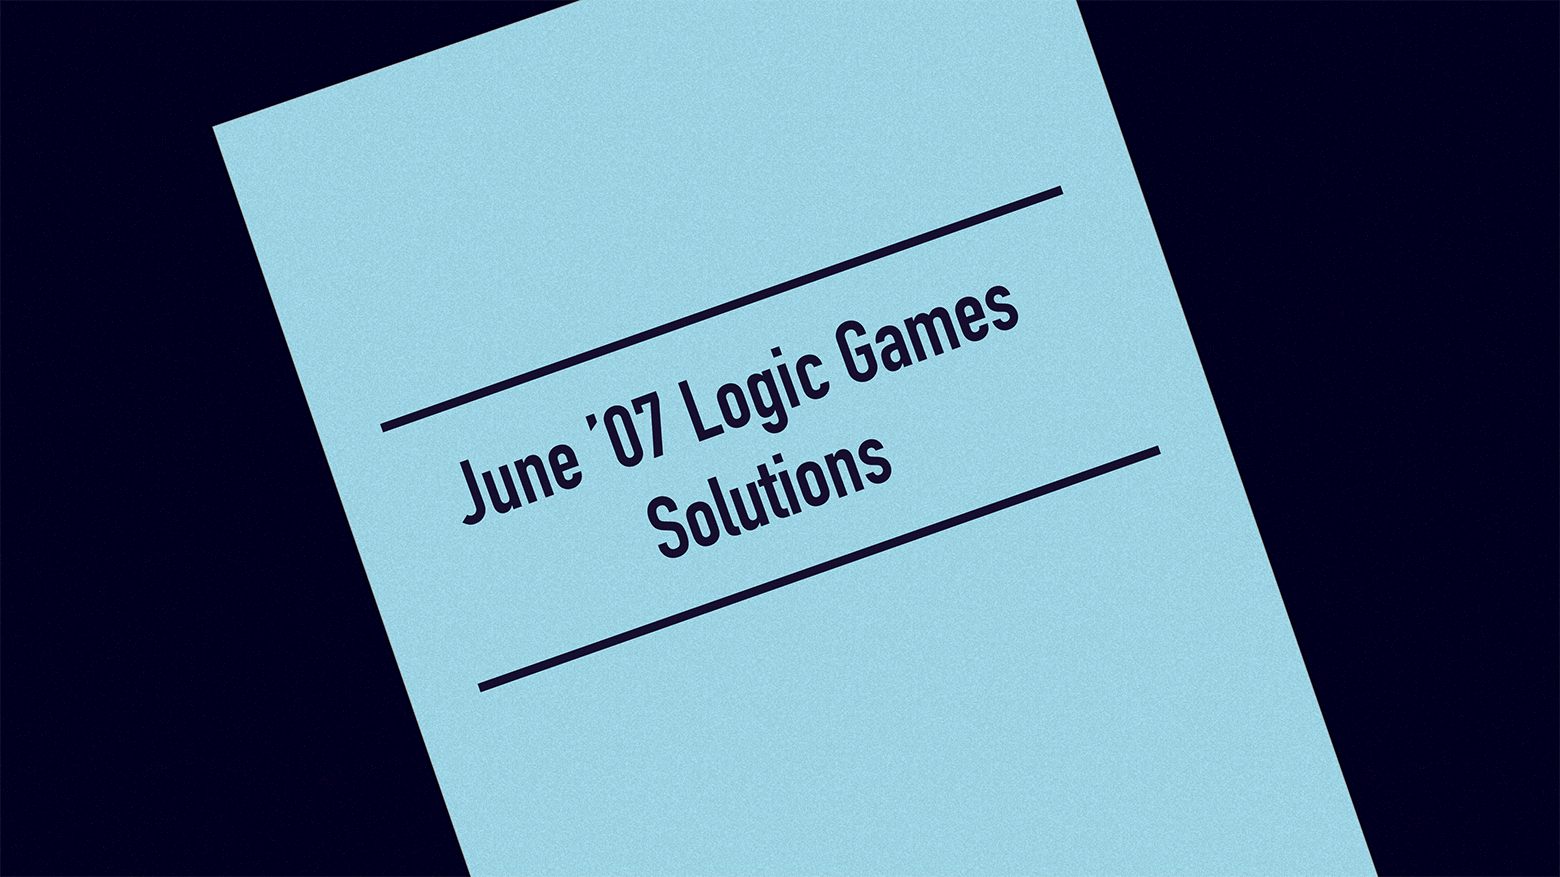 Logic Games Online - Play Games In Your Browser